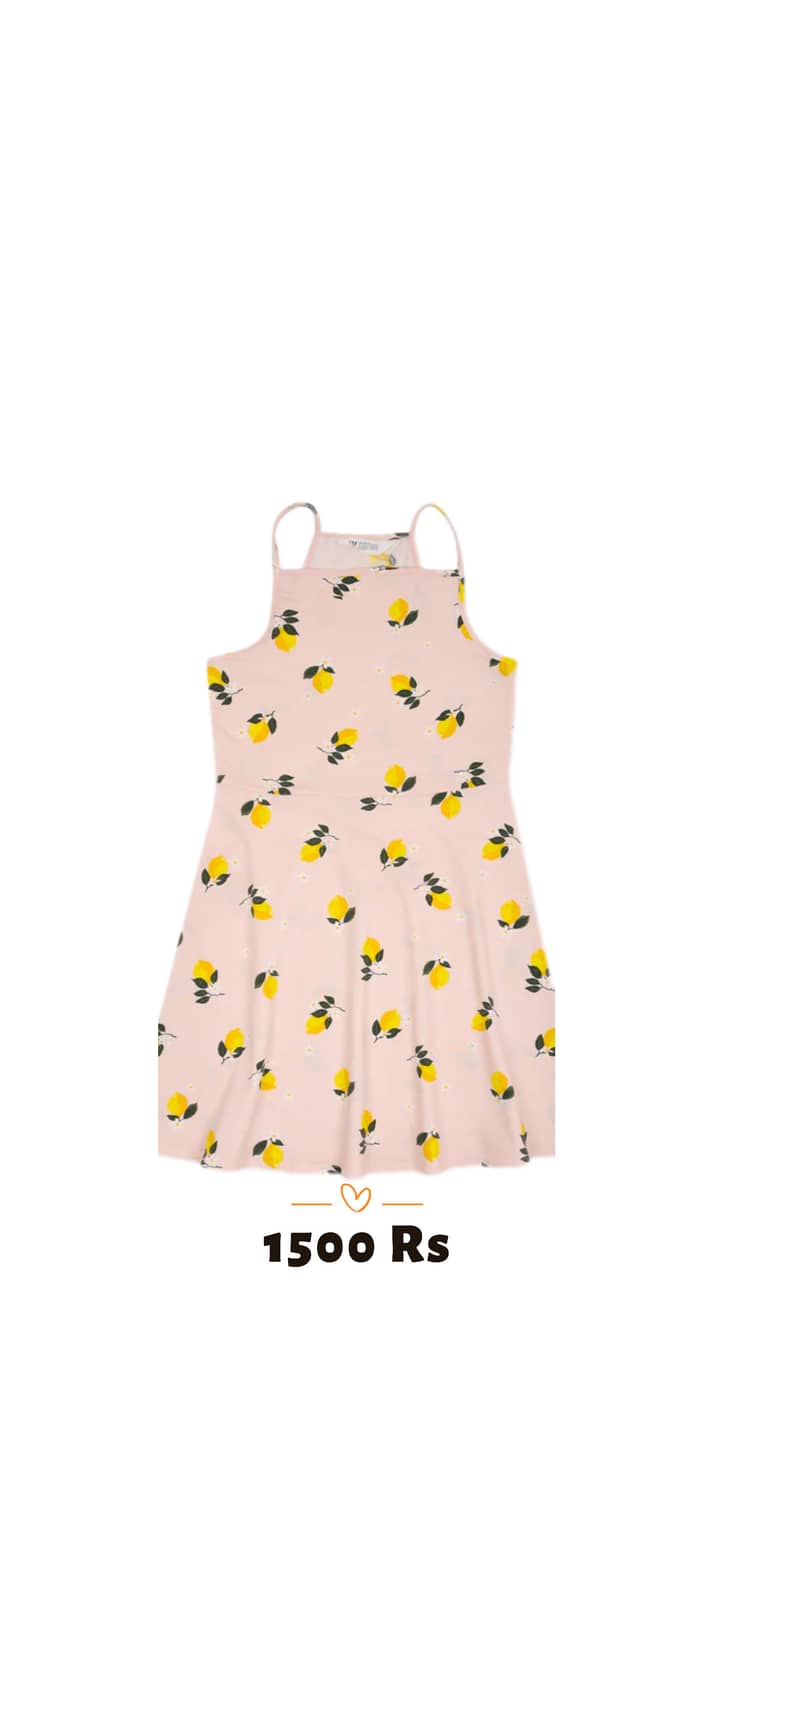 H&M branded clothes on huge discount 2